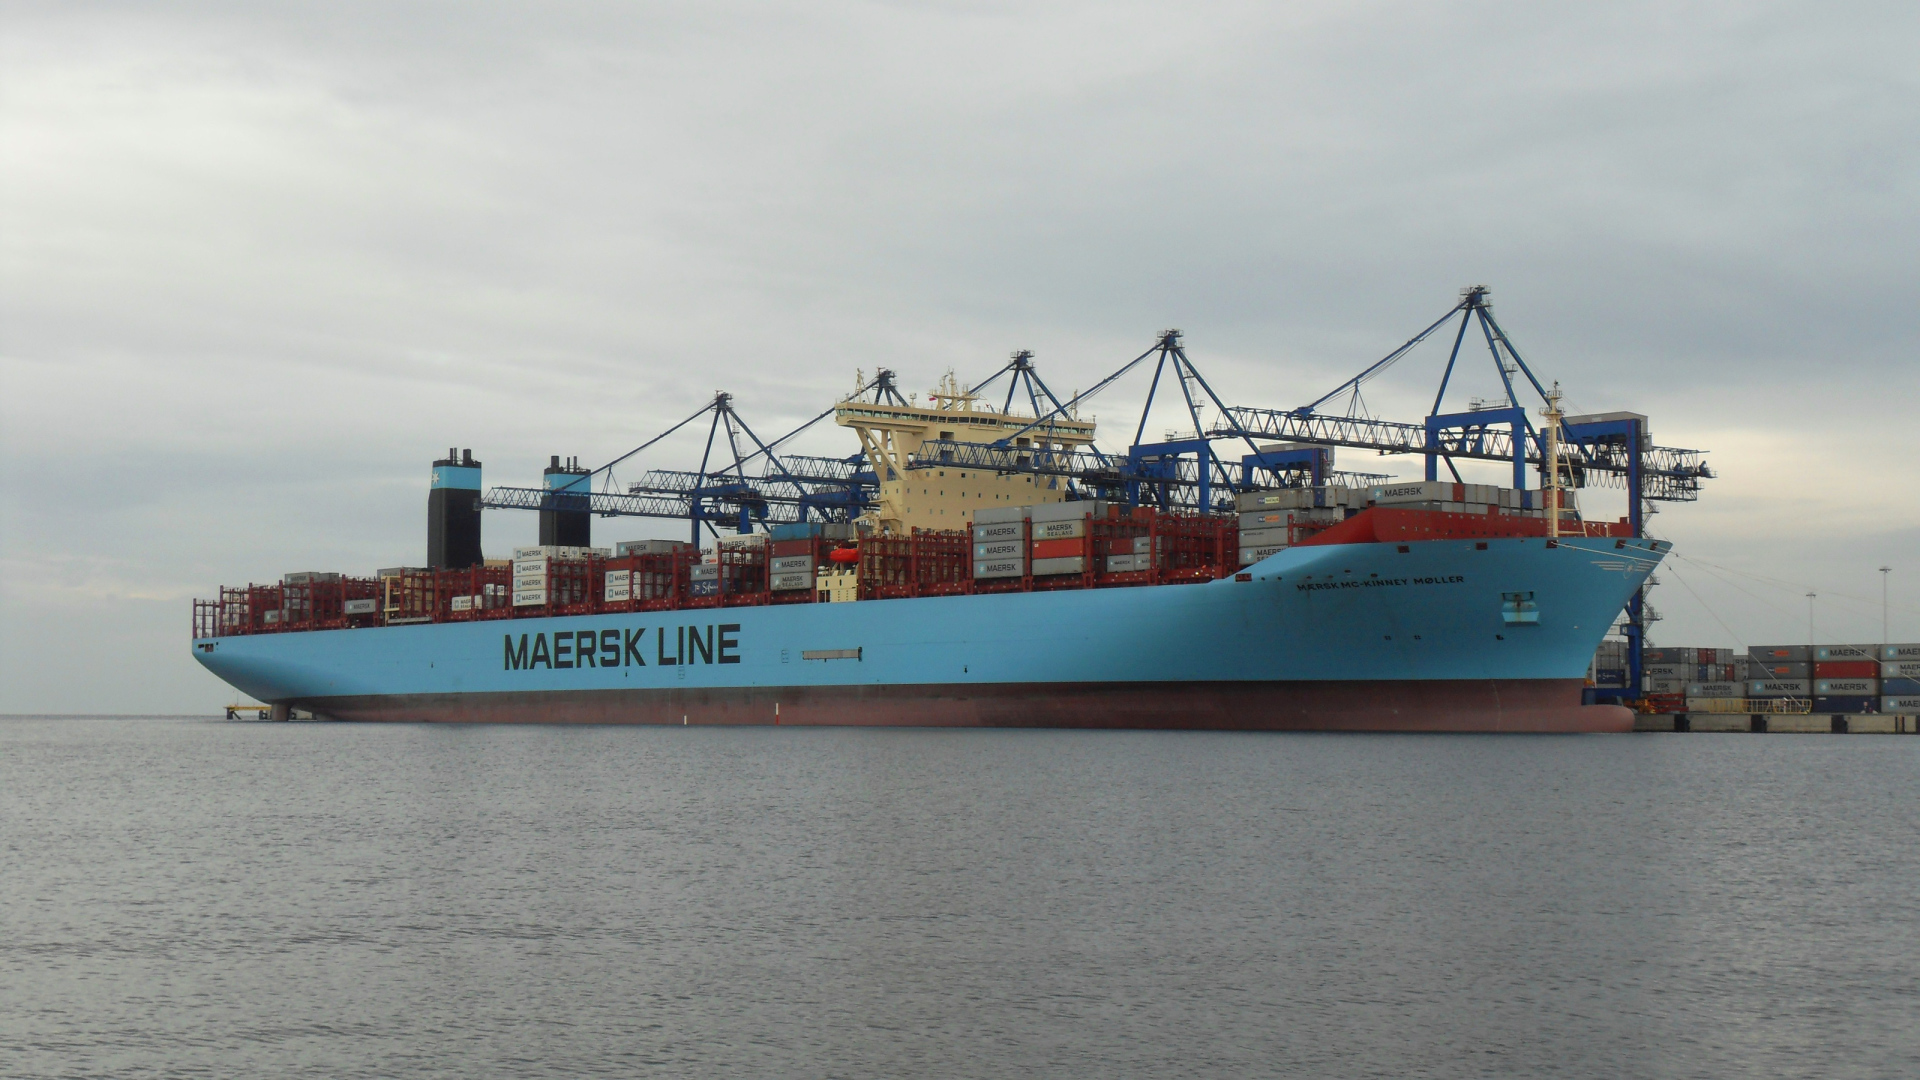 Large cargo ship Maersk Mc-Kinney Moller with containers